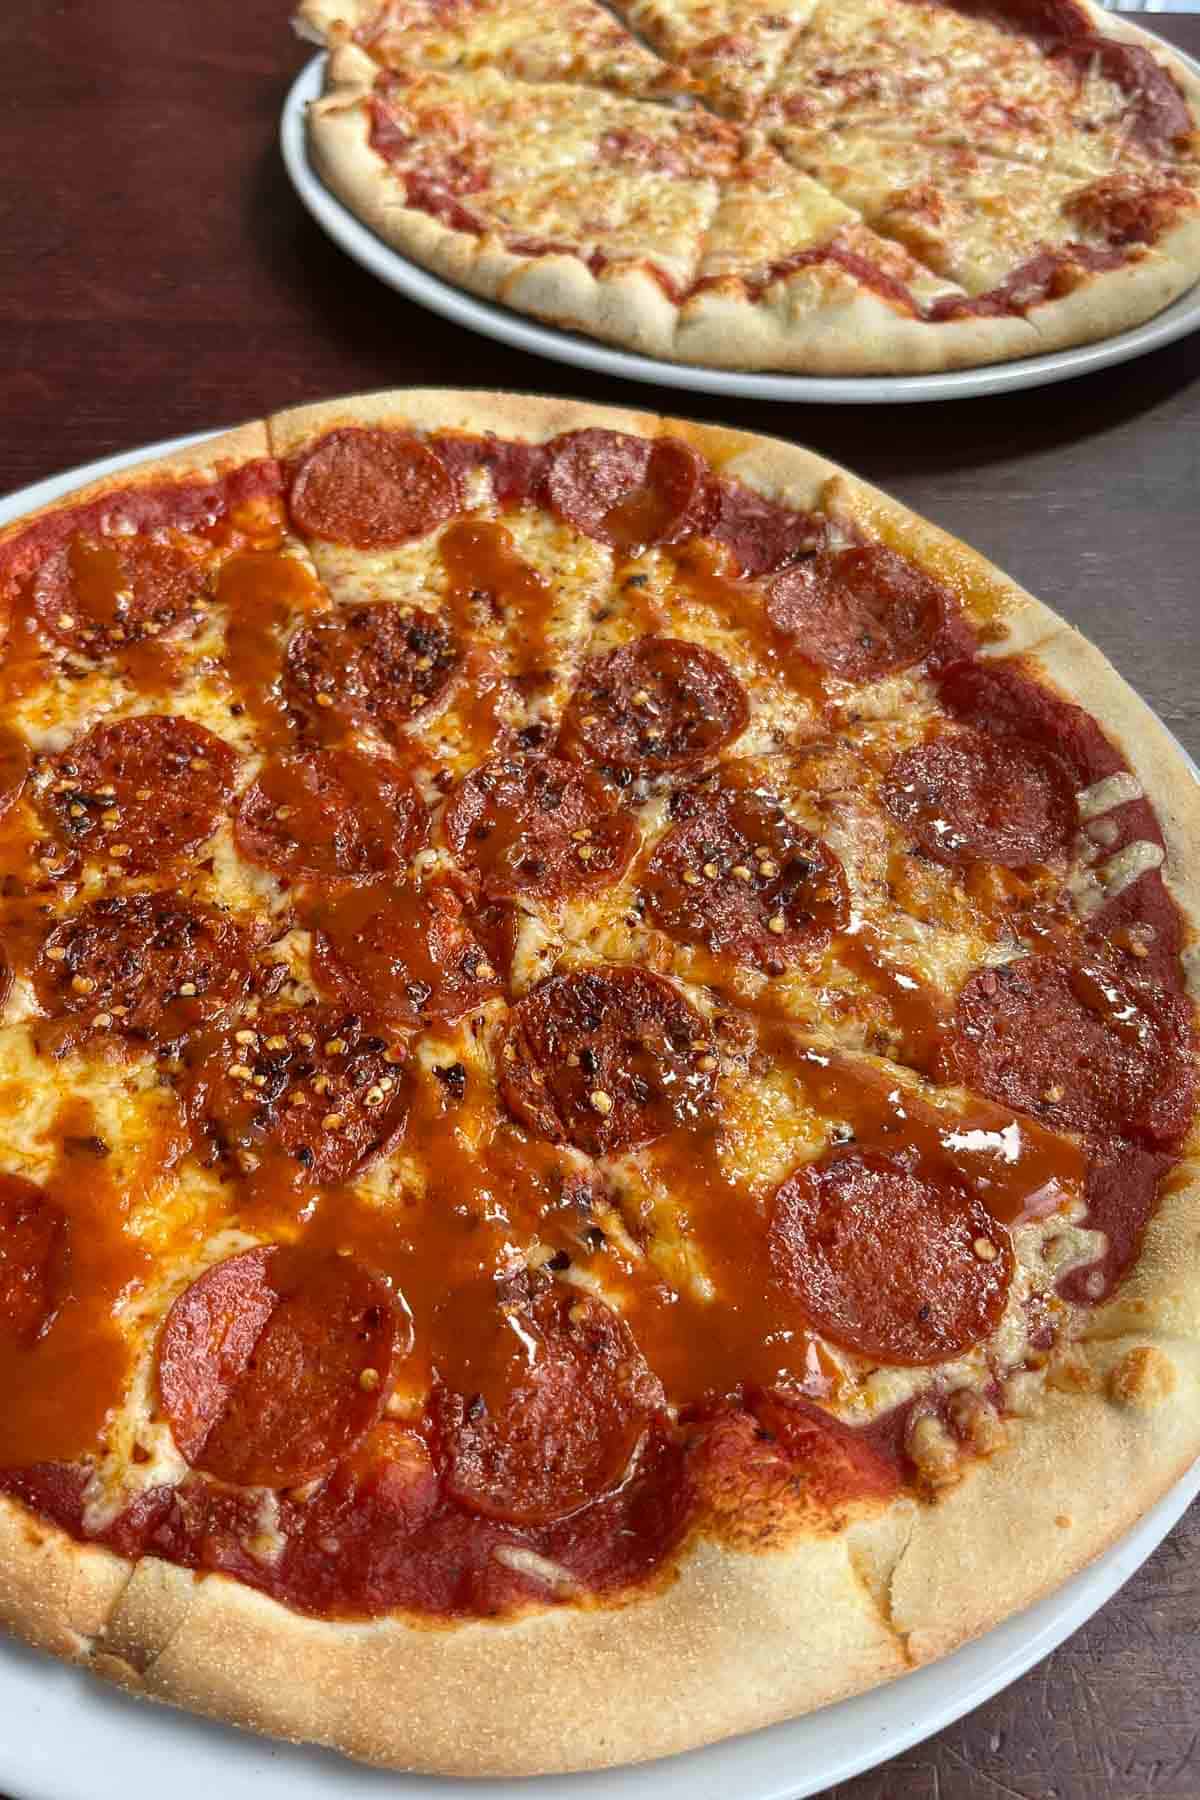 pepperoni pizza with a plain cheese pizza in the background.